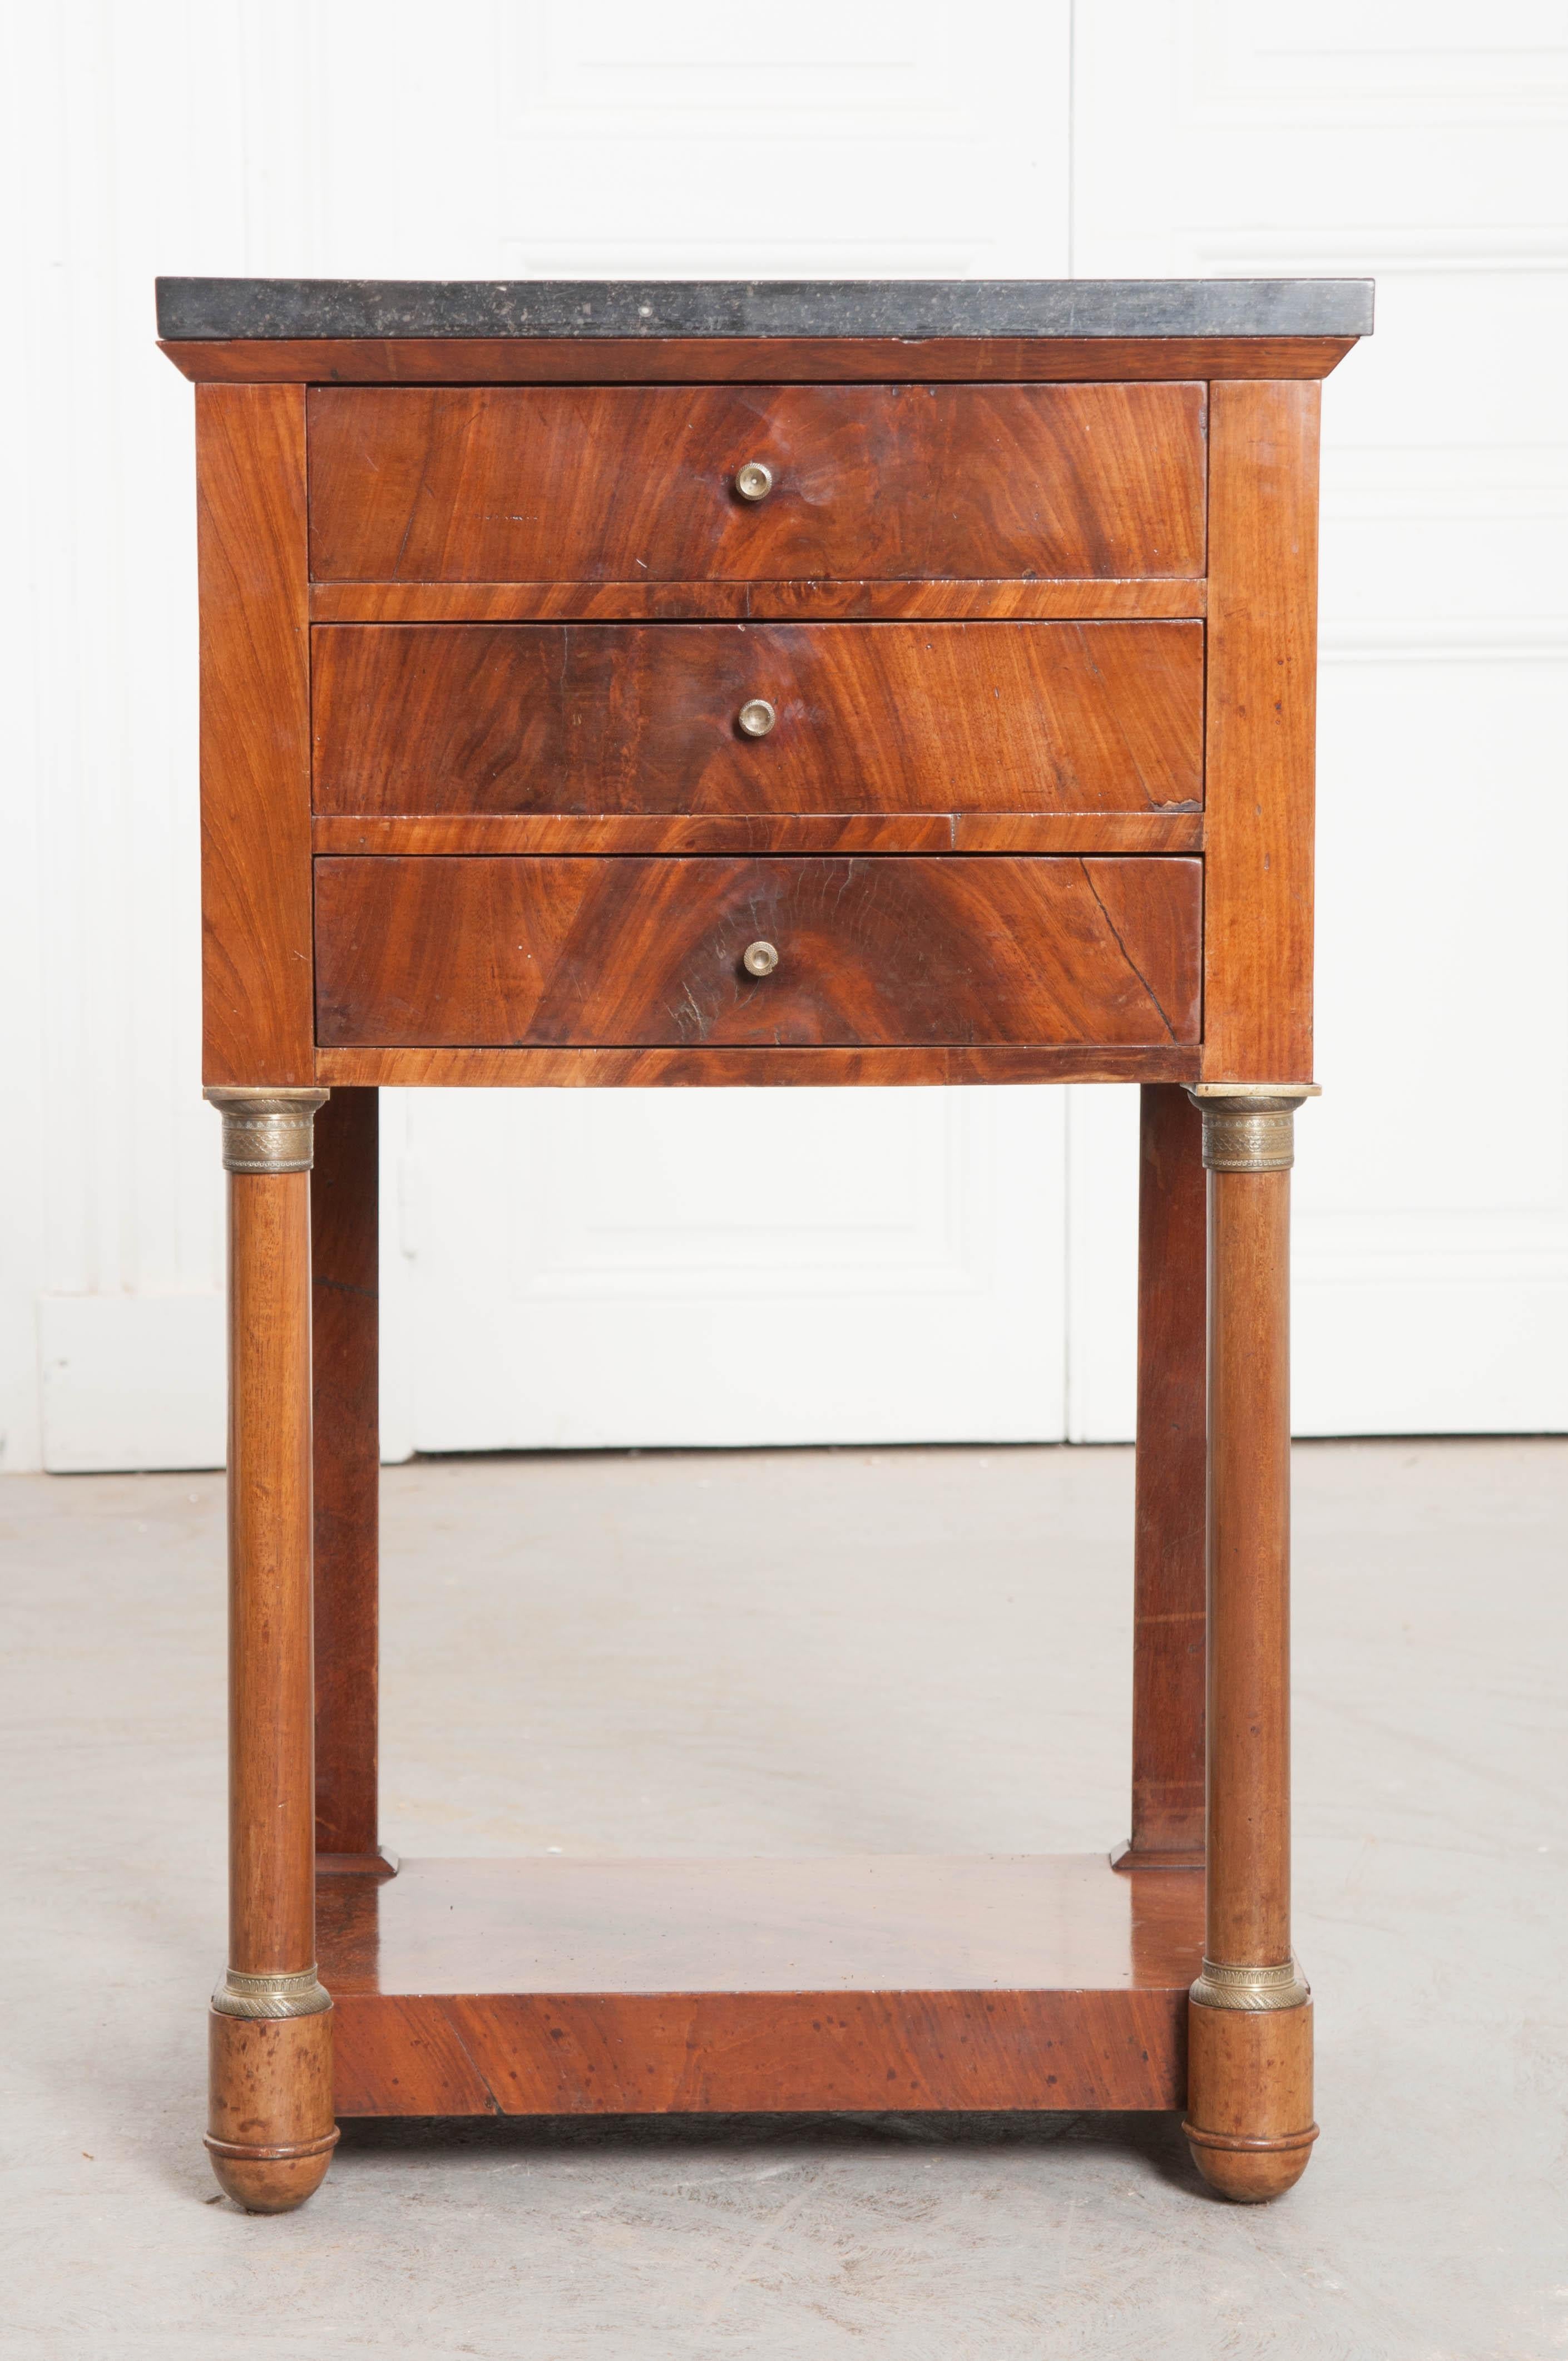 A stately three drawer mahogany bedside table, with black fossil marble top, from 1910s France. The table was made in the Empire style using beautifully toned mahogany with exceptional grain. The rectangular piece of black fossil marble is in